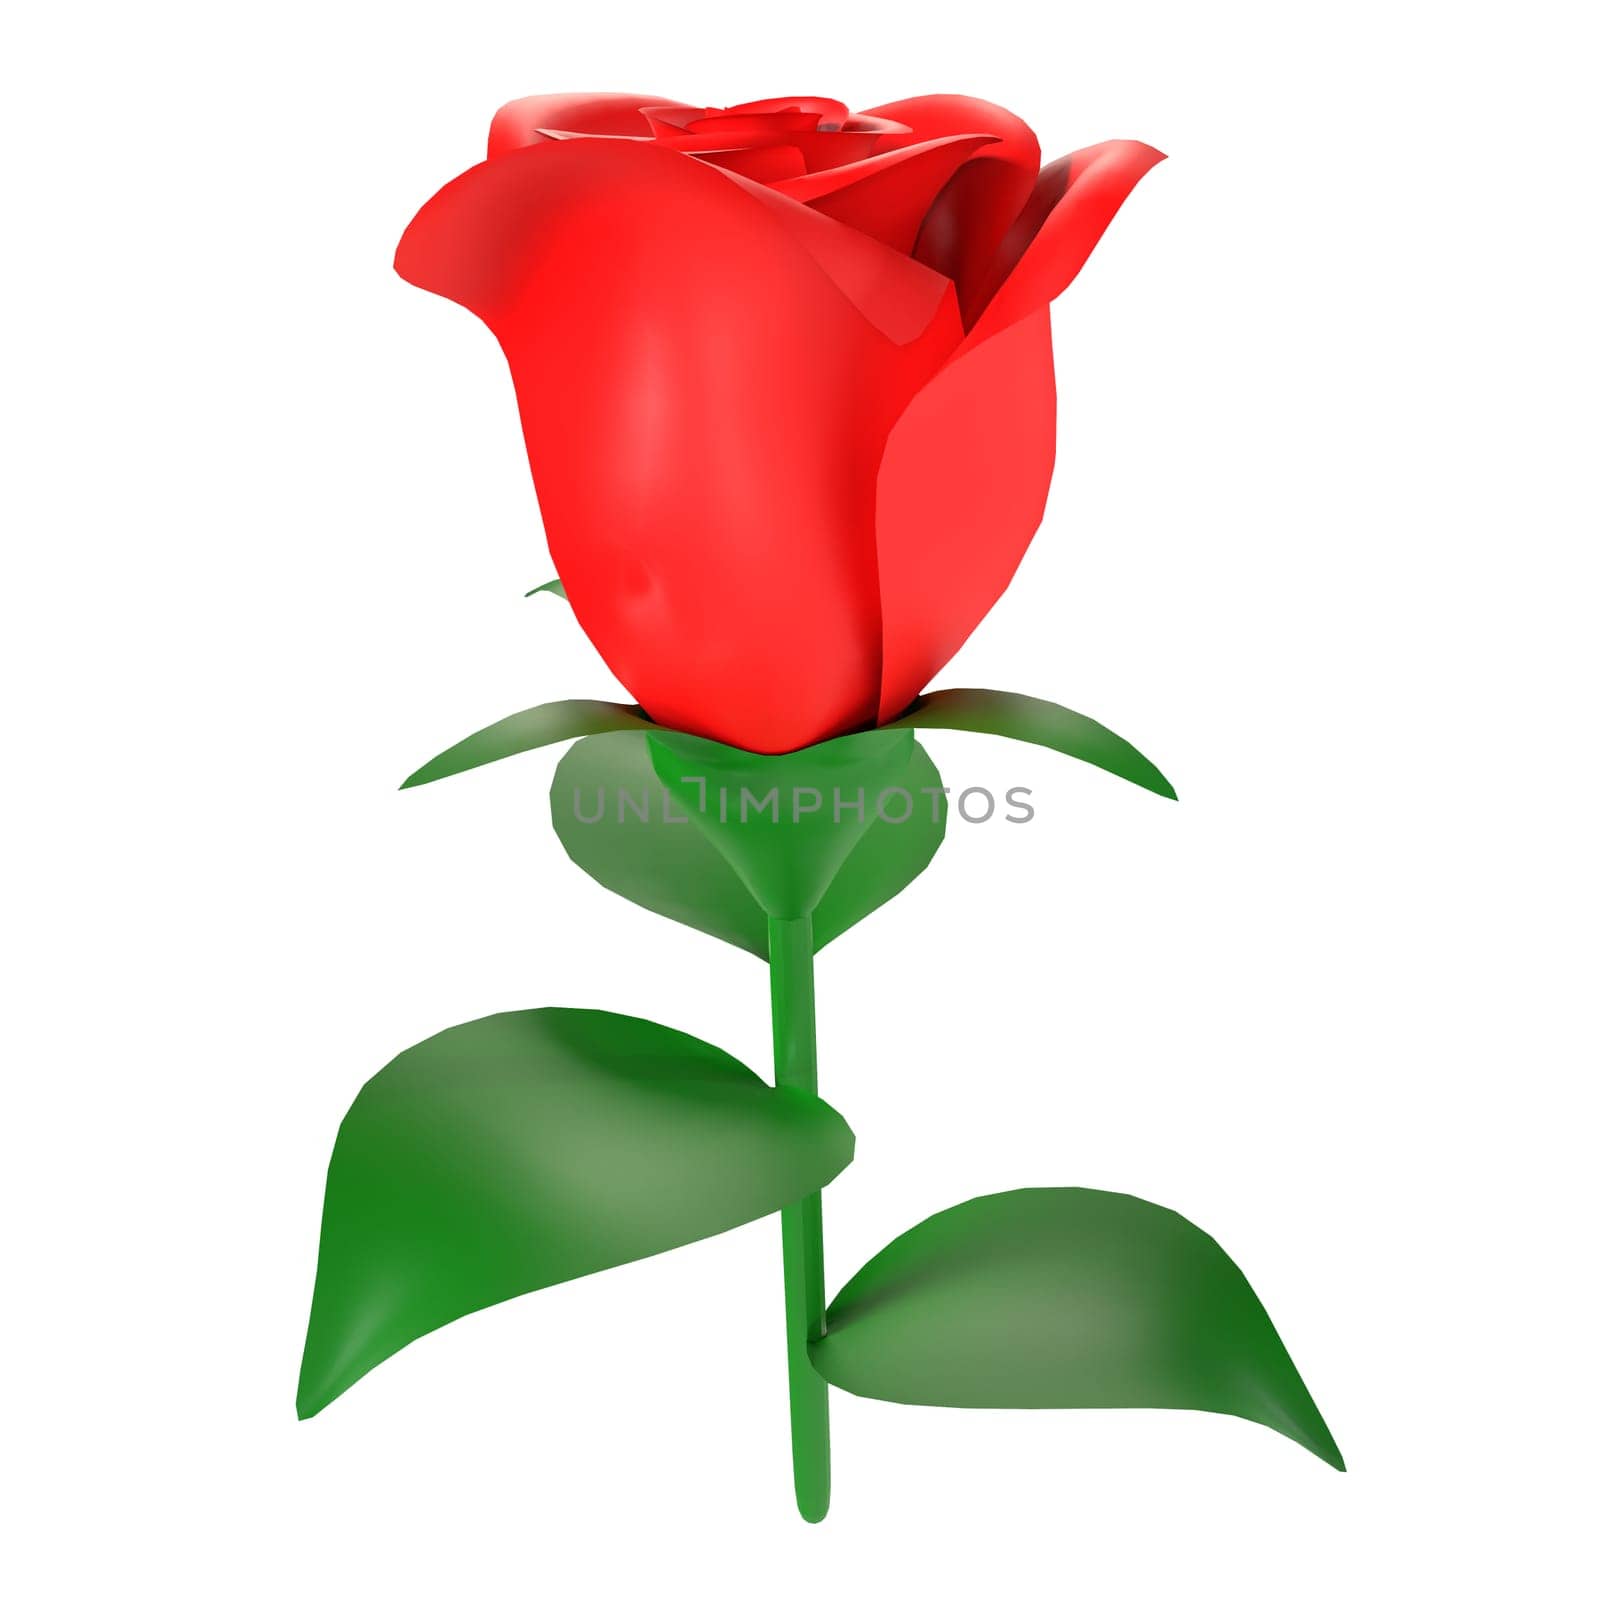 Red Rose isolated on white background by gadreel